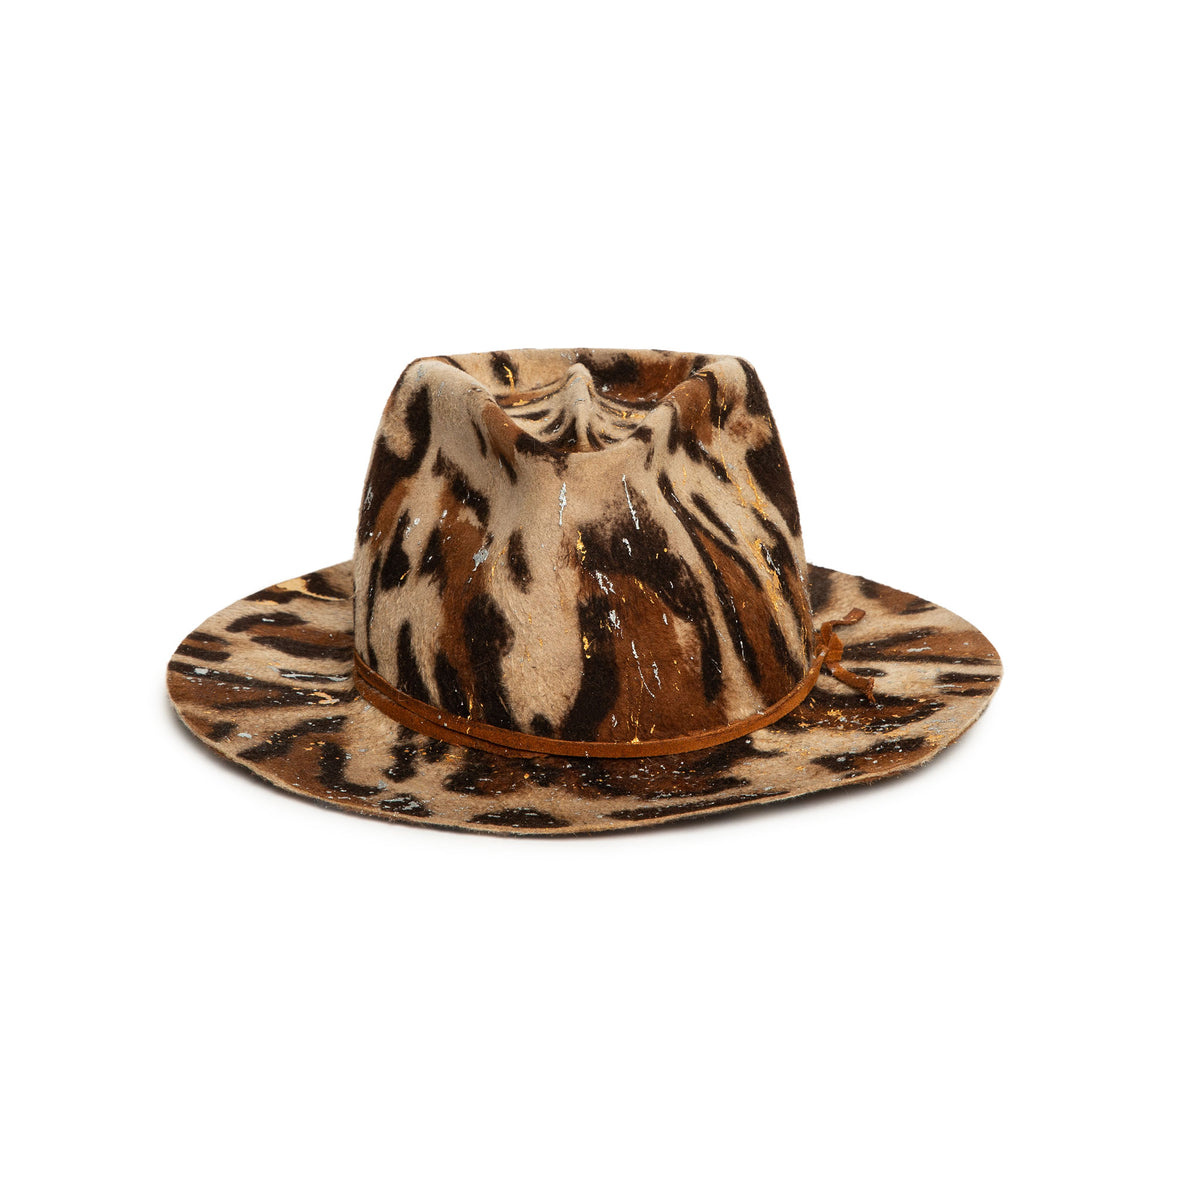 Upcycled Luxury leopard print trucker hat in 2023